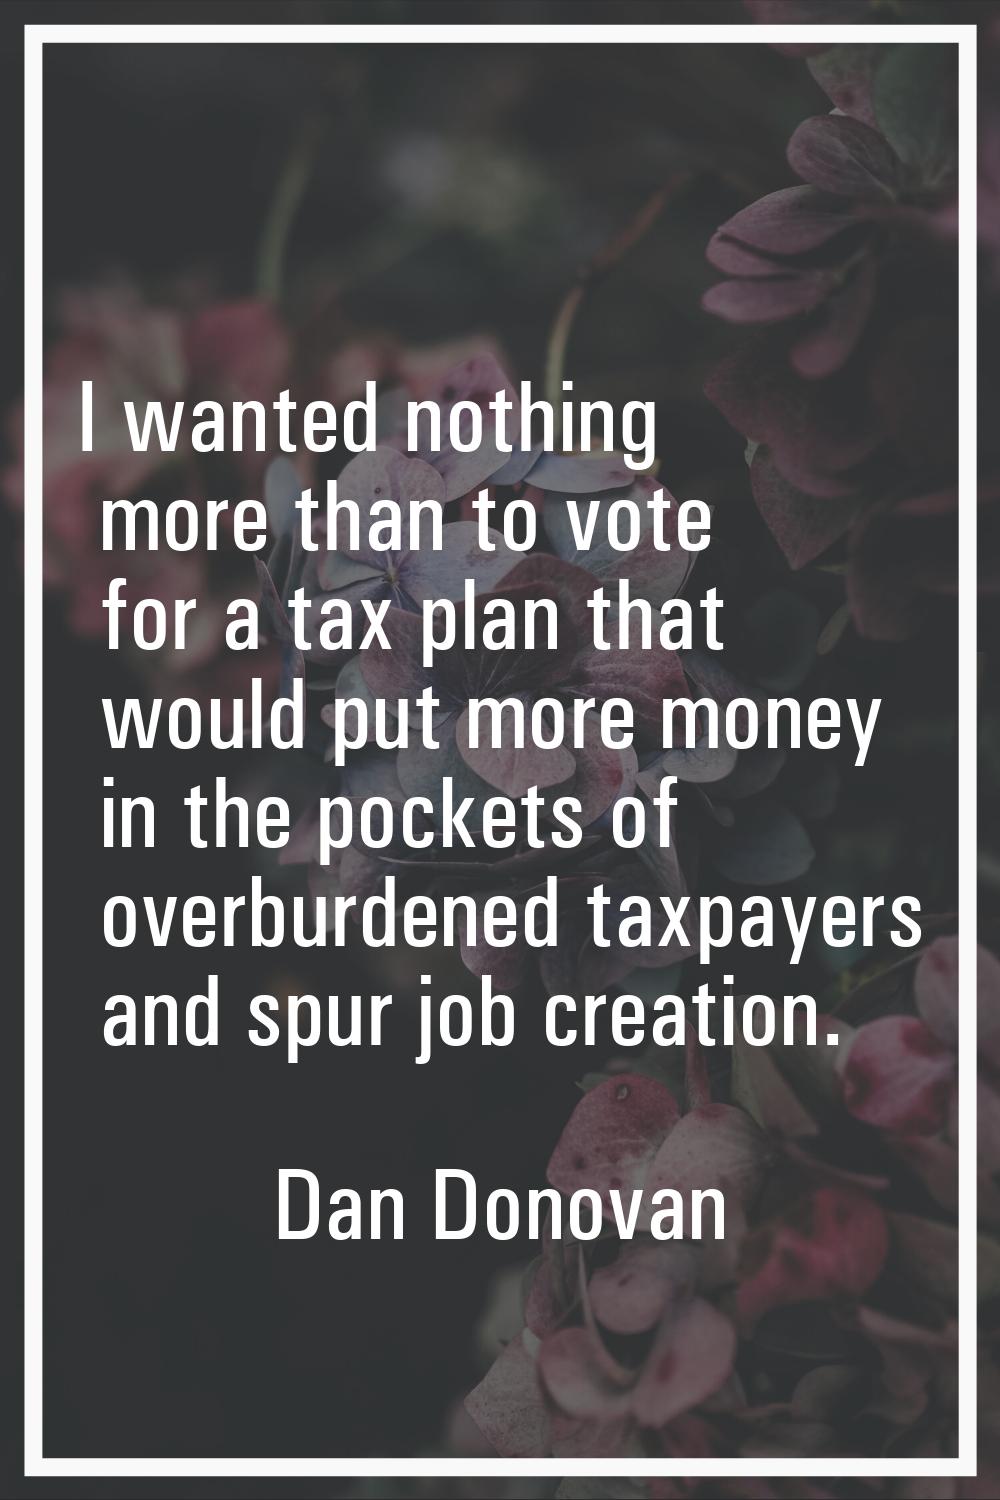 I wanted nothing more than to vote for a tax plan that would put more money in the pockets of overb